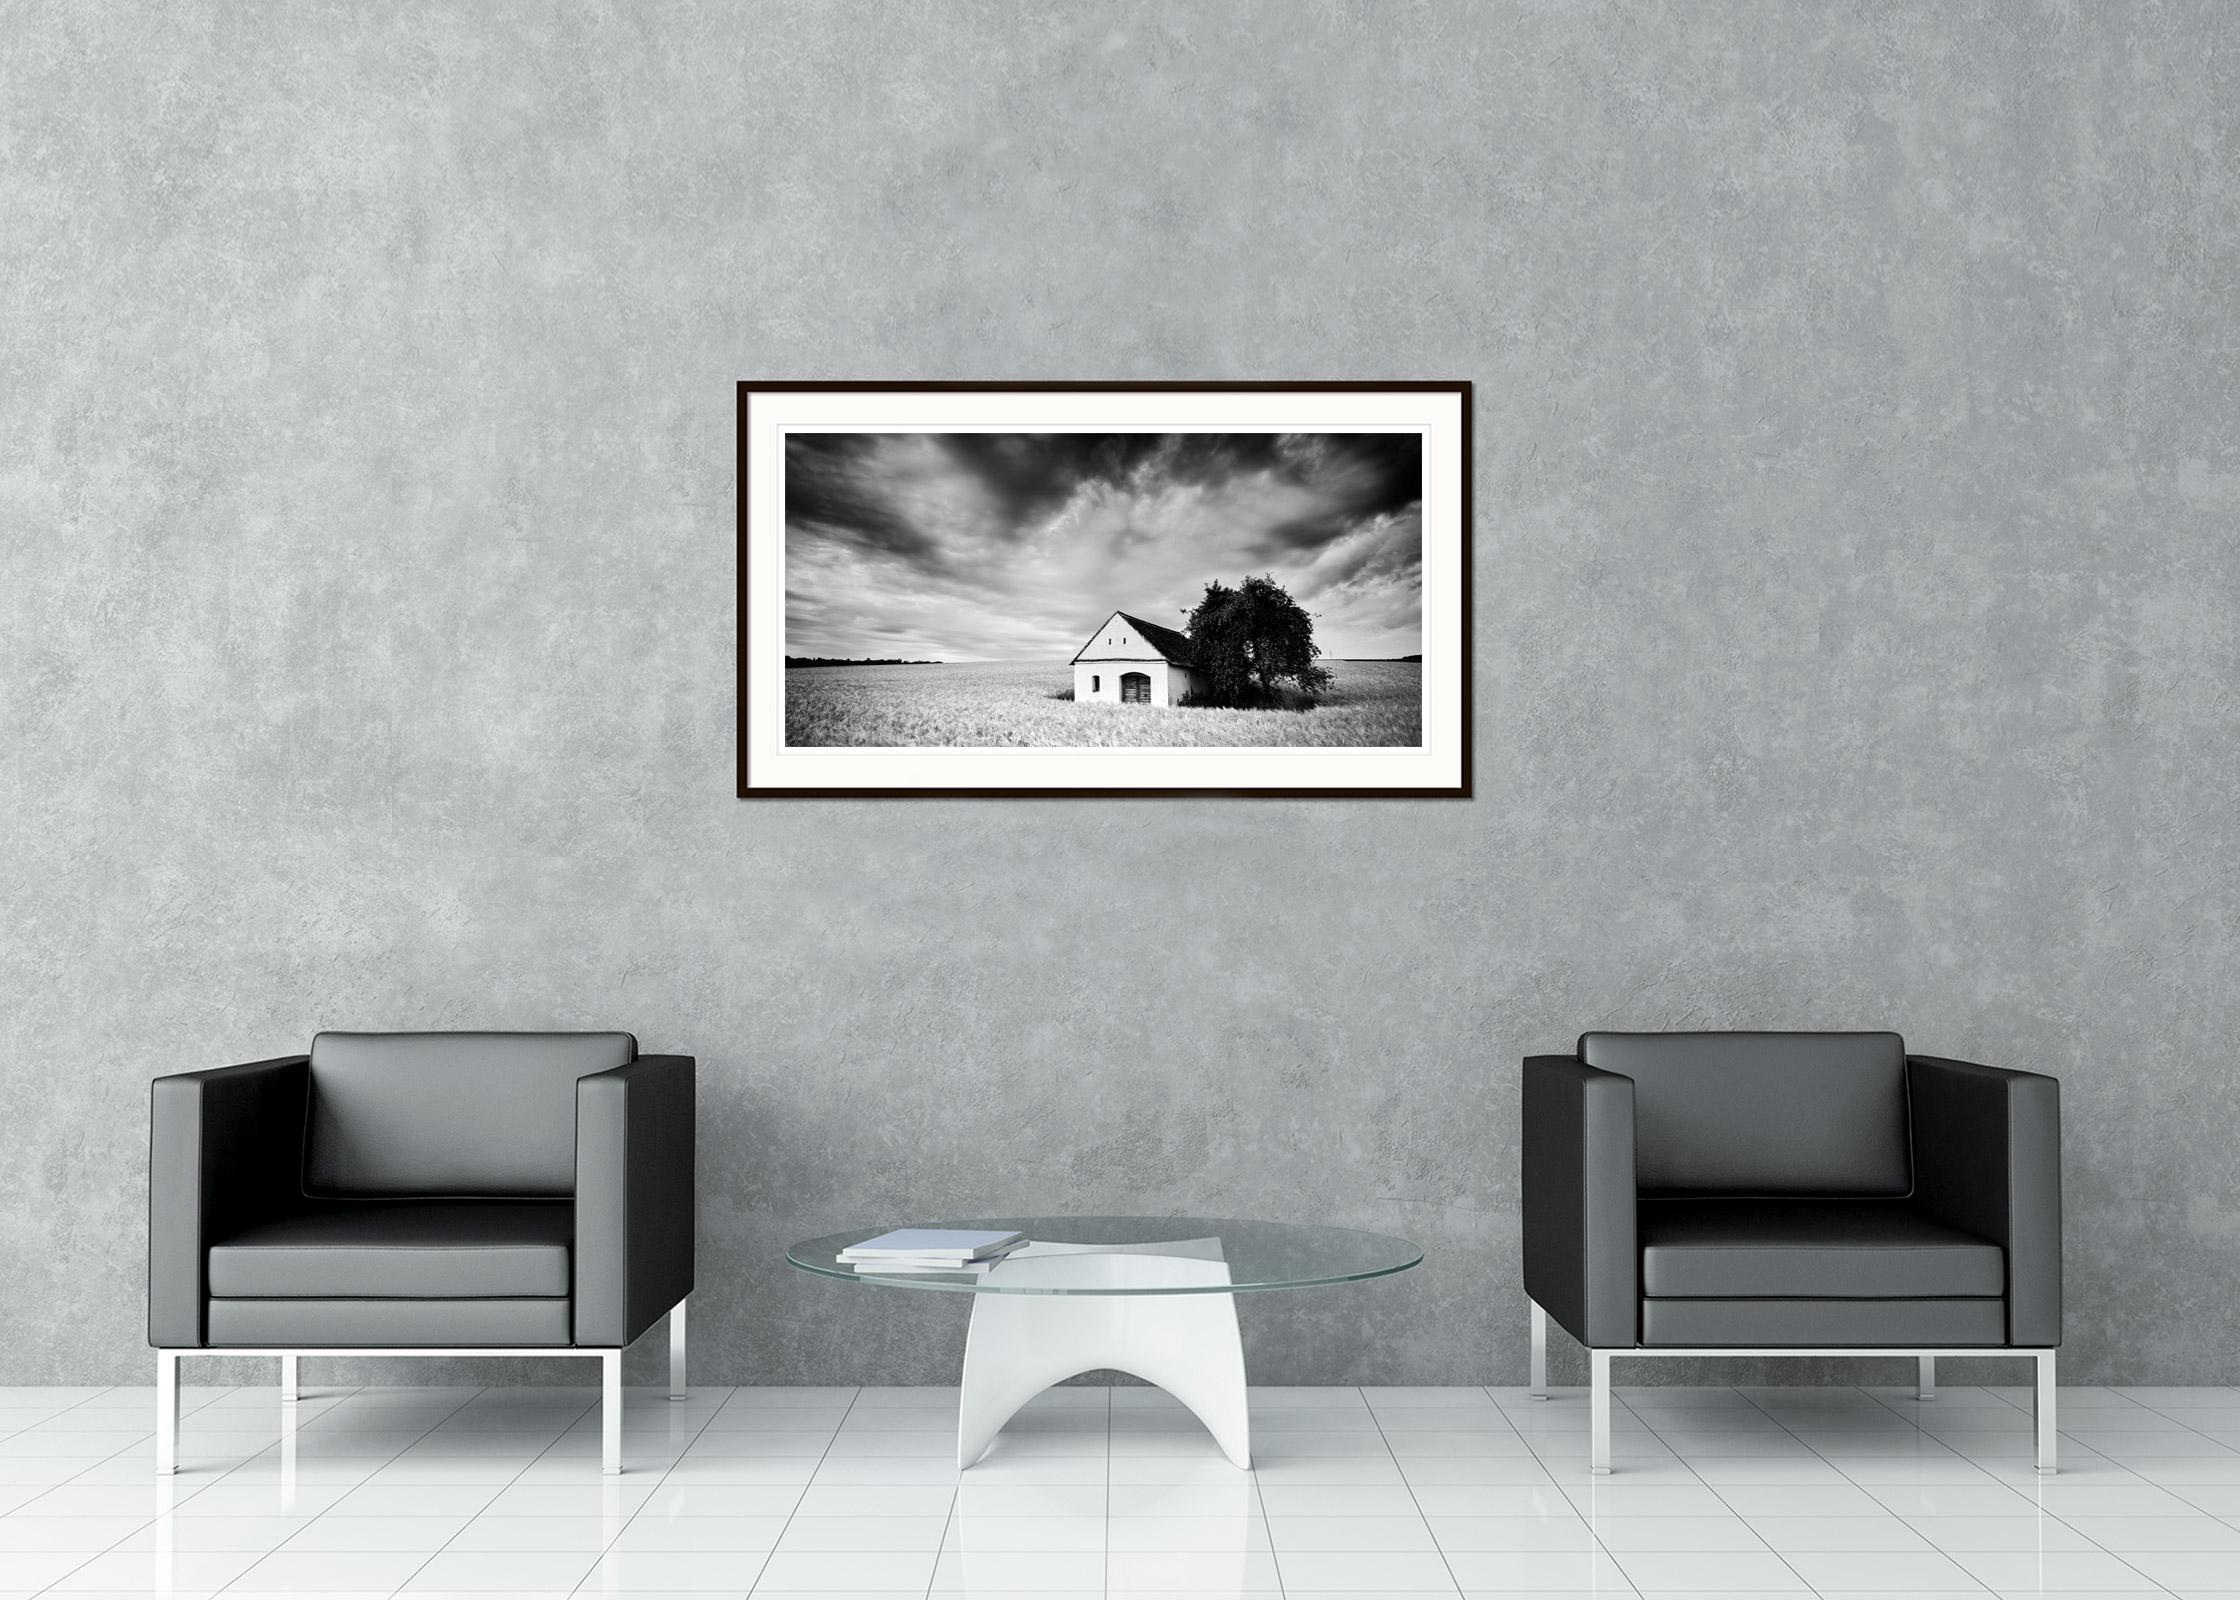 Black and white fine art long exposure landscape photography. Lonely wine press house in the corn field with spectacular clouds, Weinviertel, Austria. Archival pigment ink print, edition of 5. Signed, titled, dated and numbered by artist.